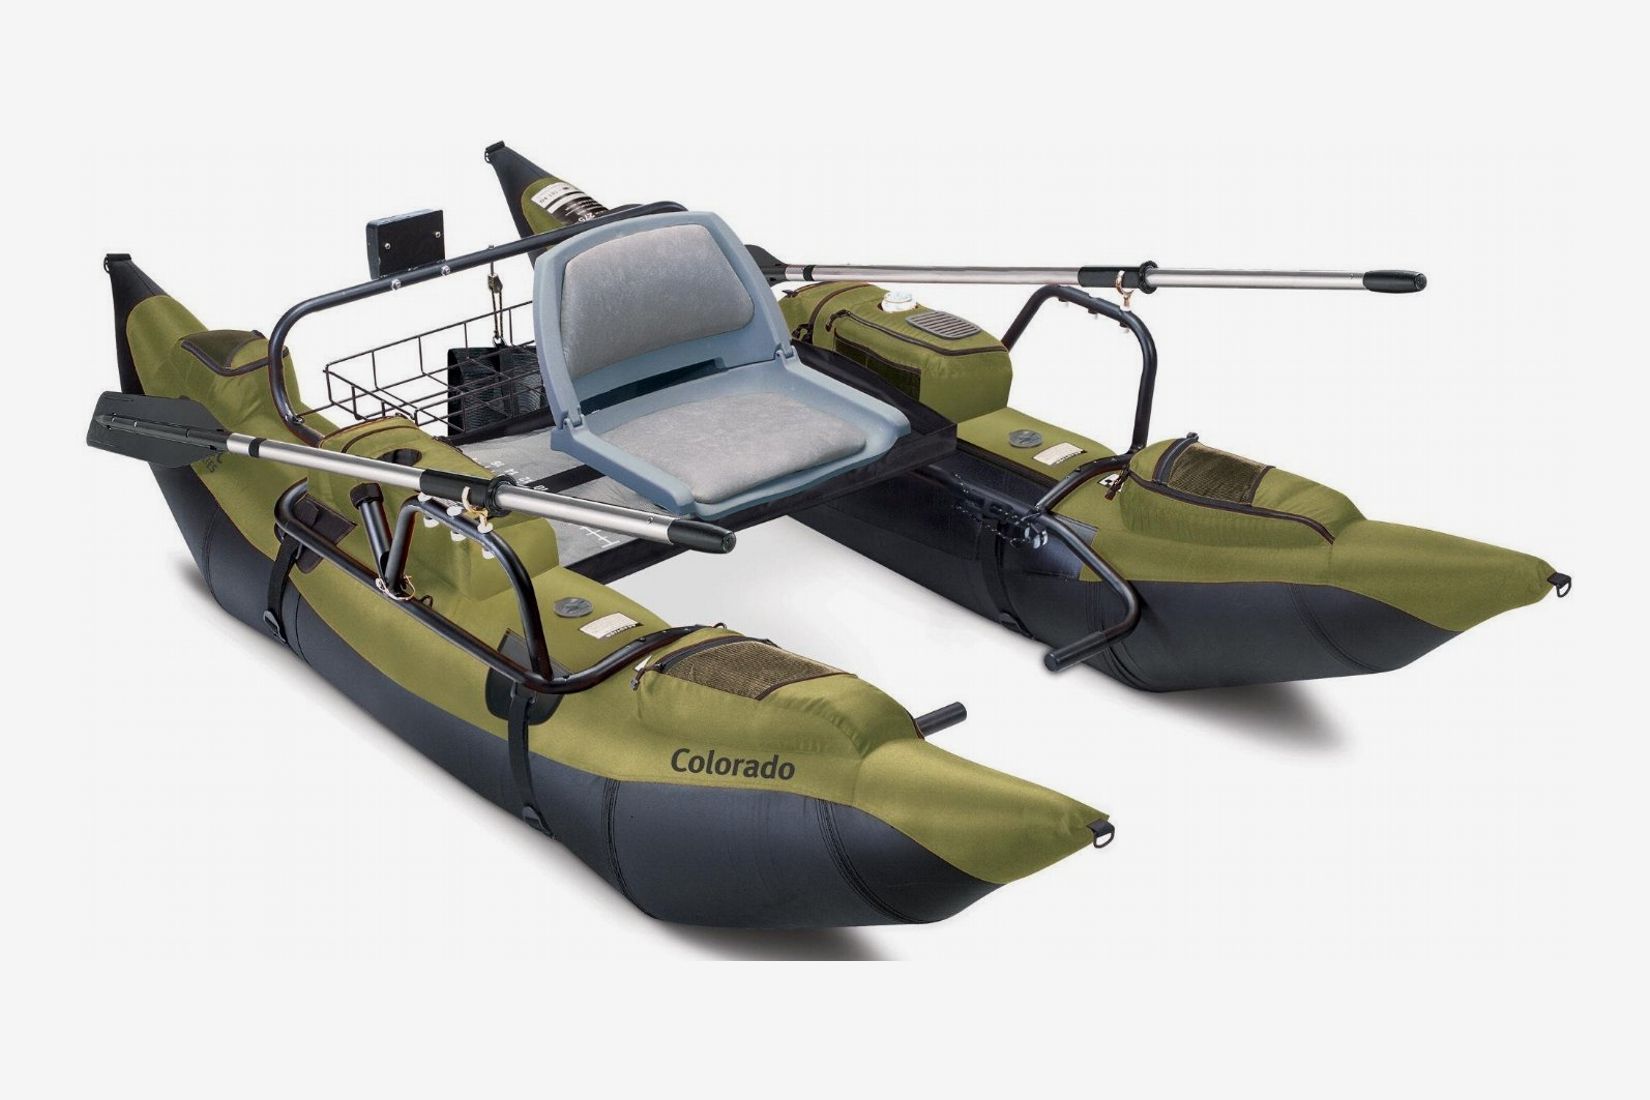 Color : Gray blue, Size : 230x130x46cm YoLiy Inflatable Boats/Rafts 3 Person 300 Kg Loading Capacity Green Inflatable Boat with Aluminum Oars and Pump Fishing Dinghy 230x130x46cm Enjoy Water Fun 